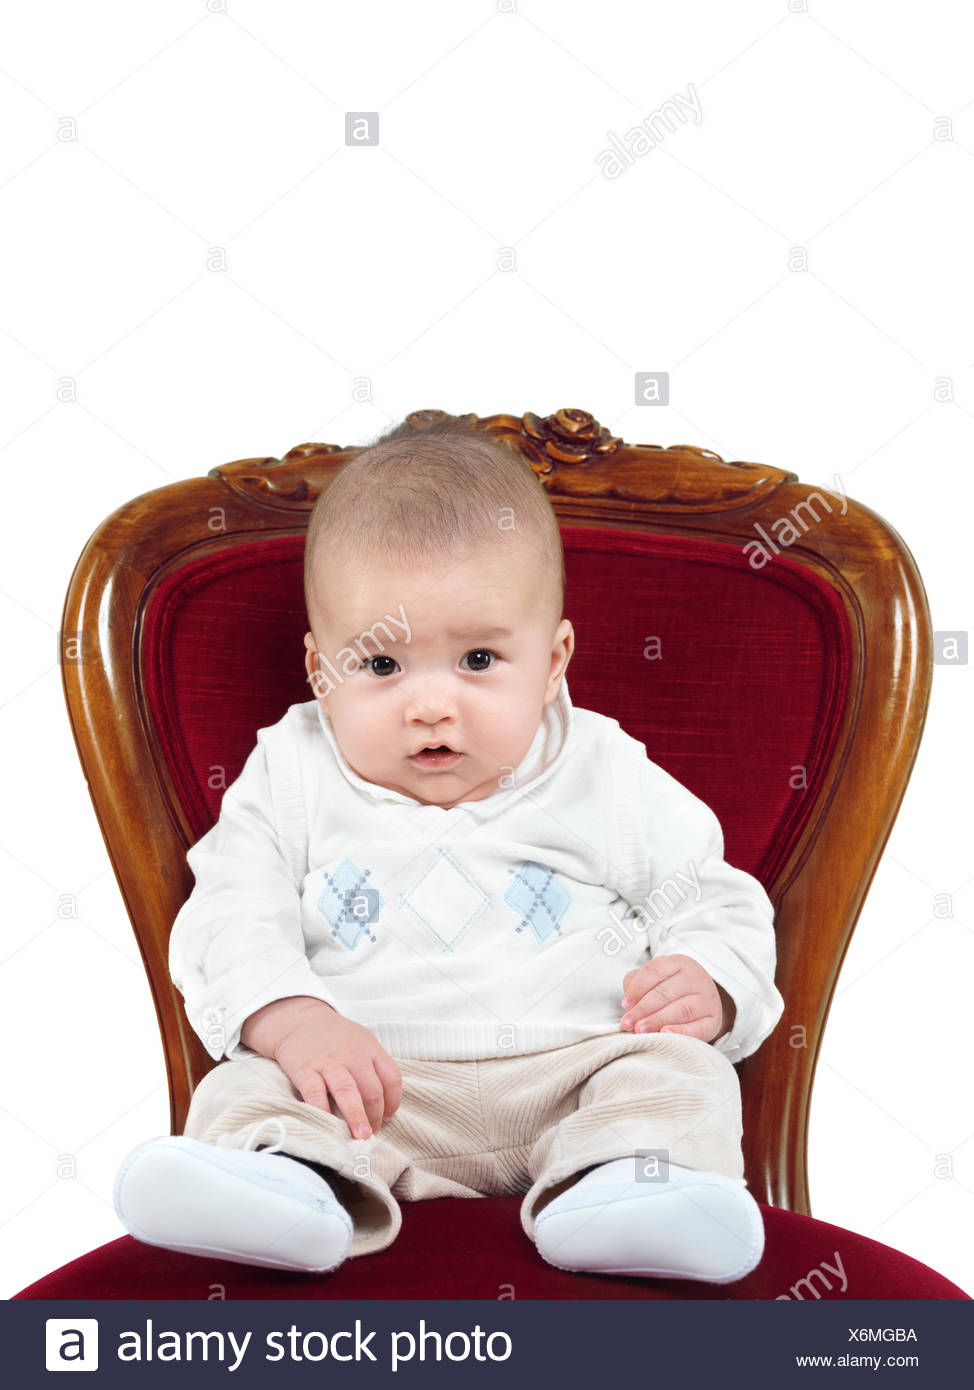 baby chair 4 months